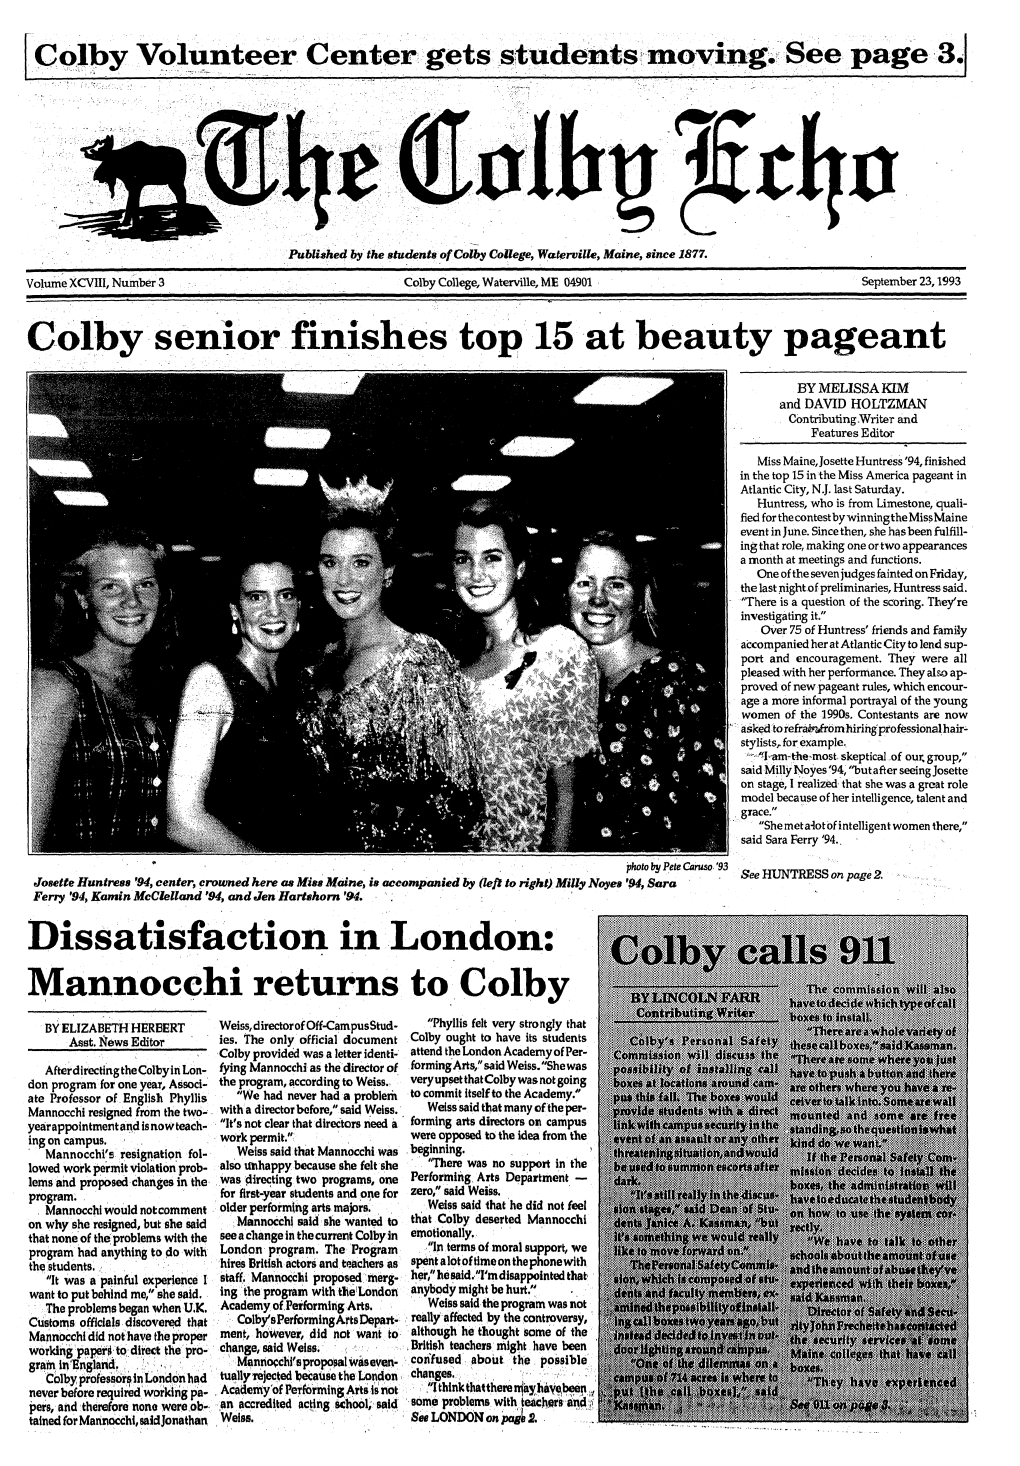 Colby Senior Finishes Top 15 at Beaut Y Pageant Dissatisfaction in London